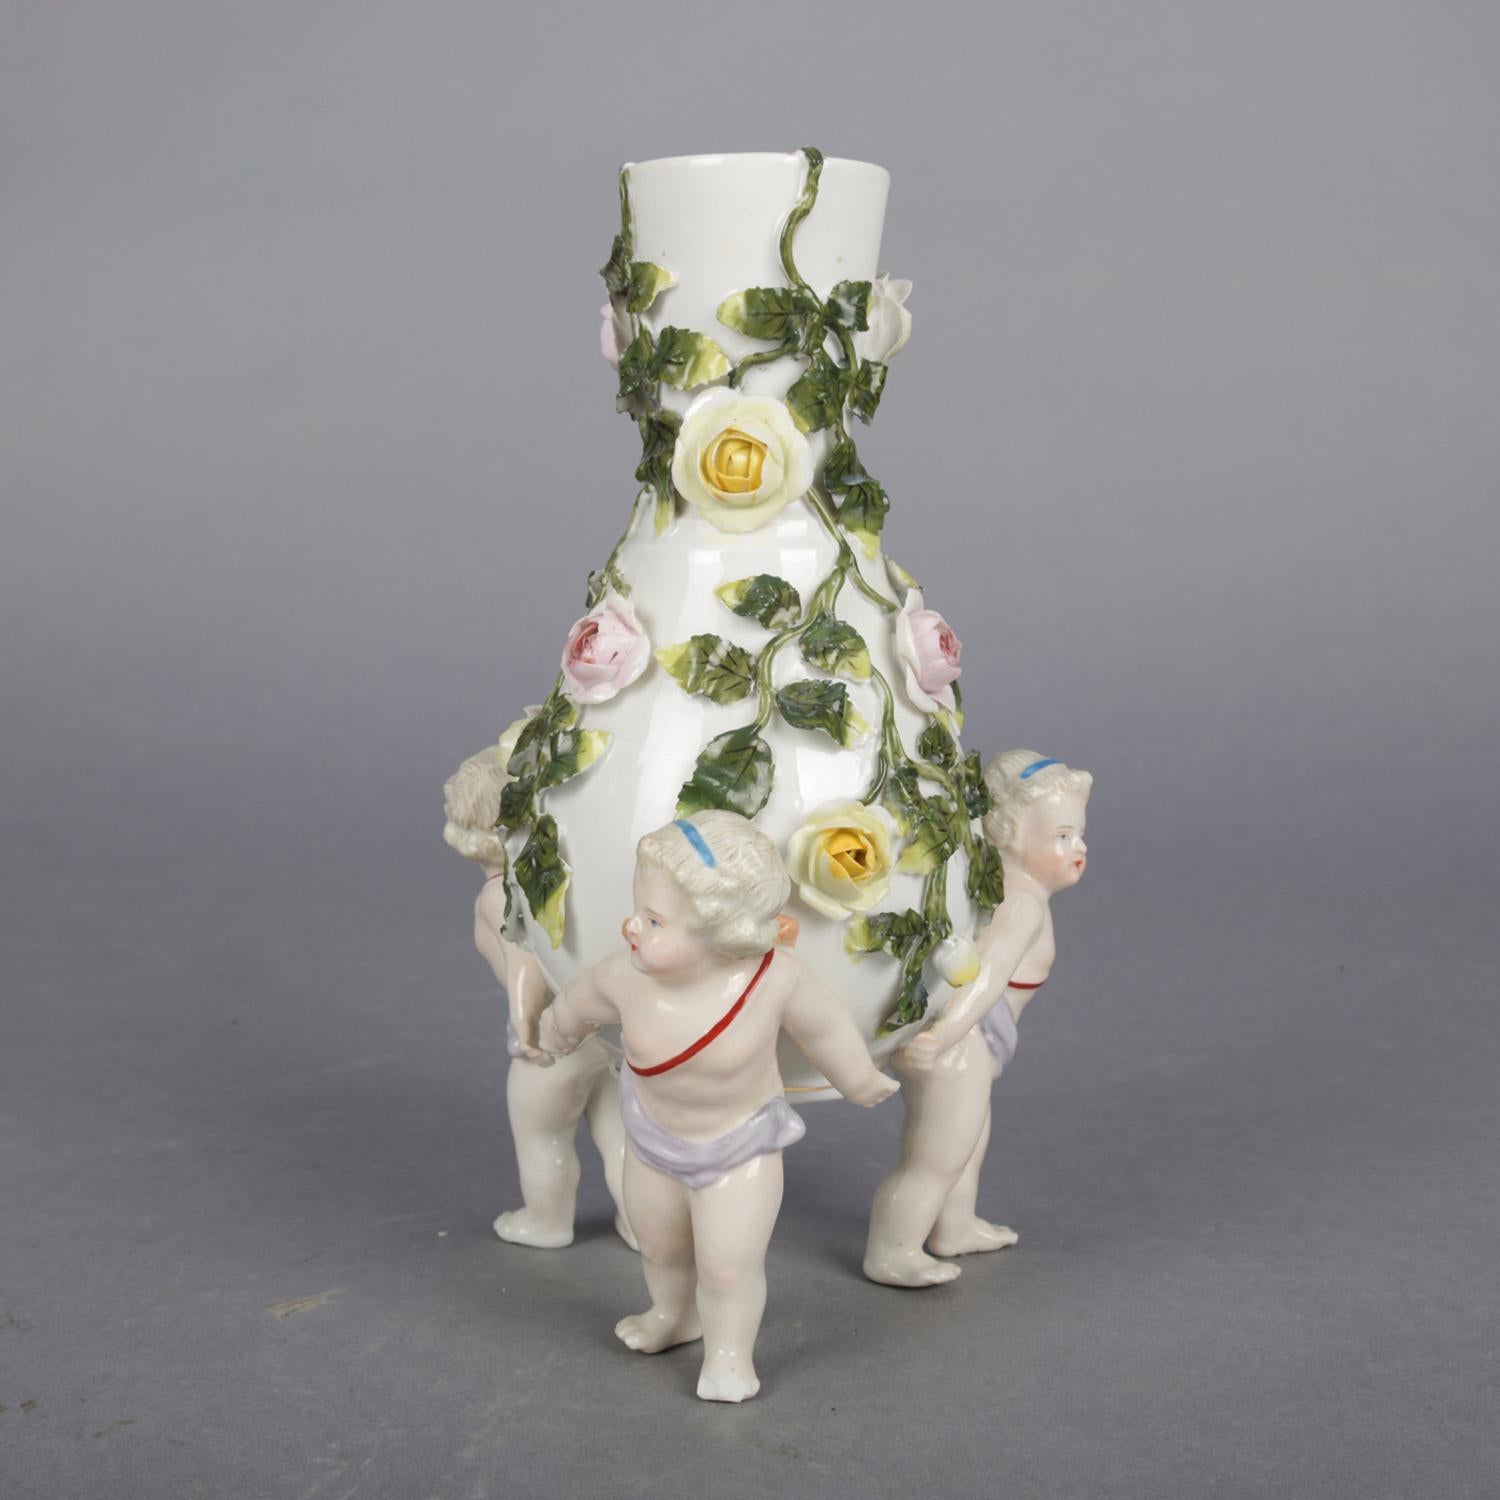 An antique figural German Meissen Porcelain bud vase features vessel with bulbous form and flared neck having all over applied and hand painted floral roses with leaf and vine, raised on three cherub form legs, crossed sword mark on base, circa